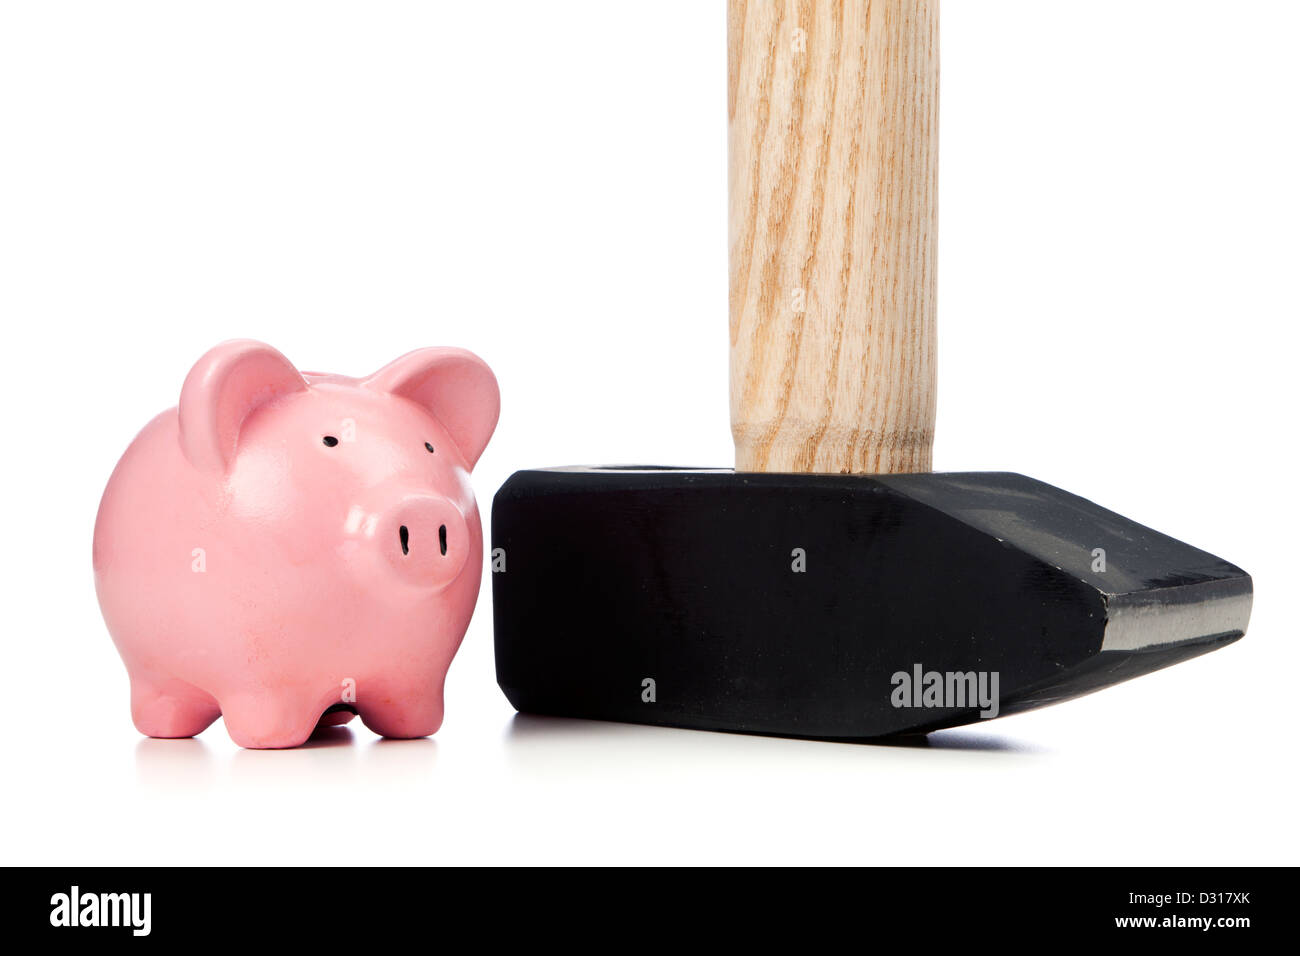 Small pink piggy bank and sledgehammer Stock Photo